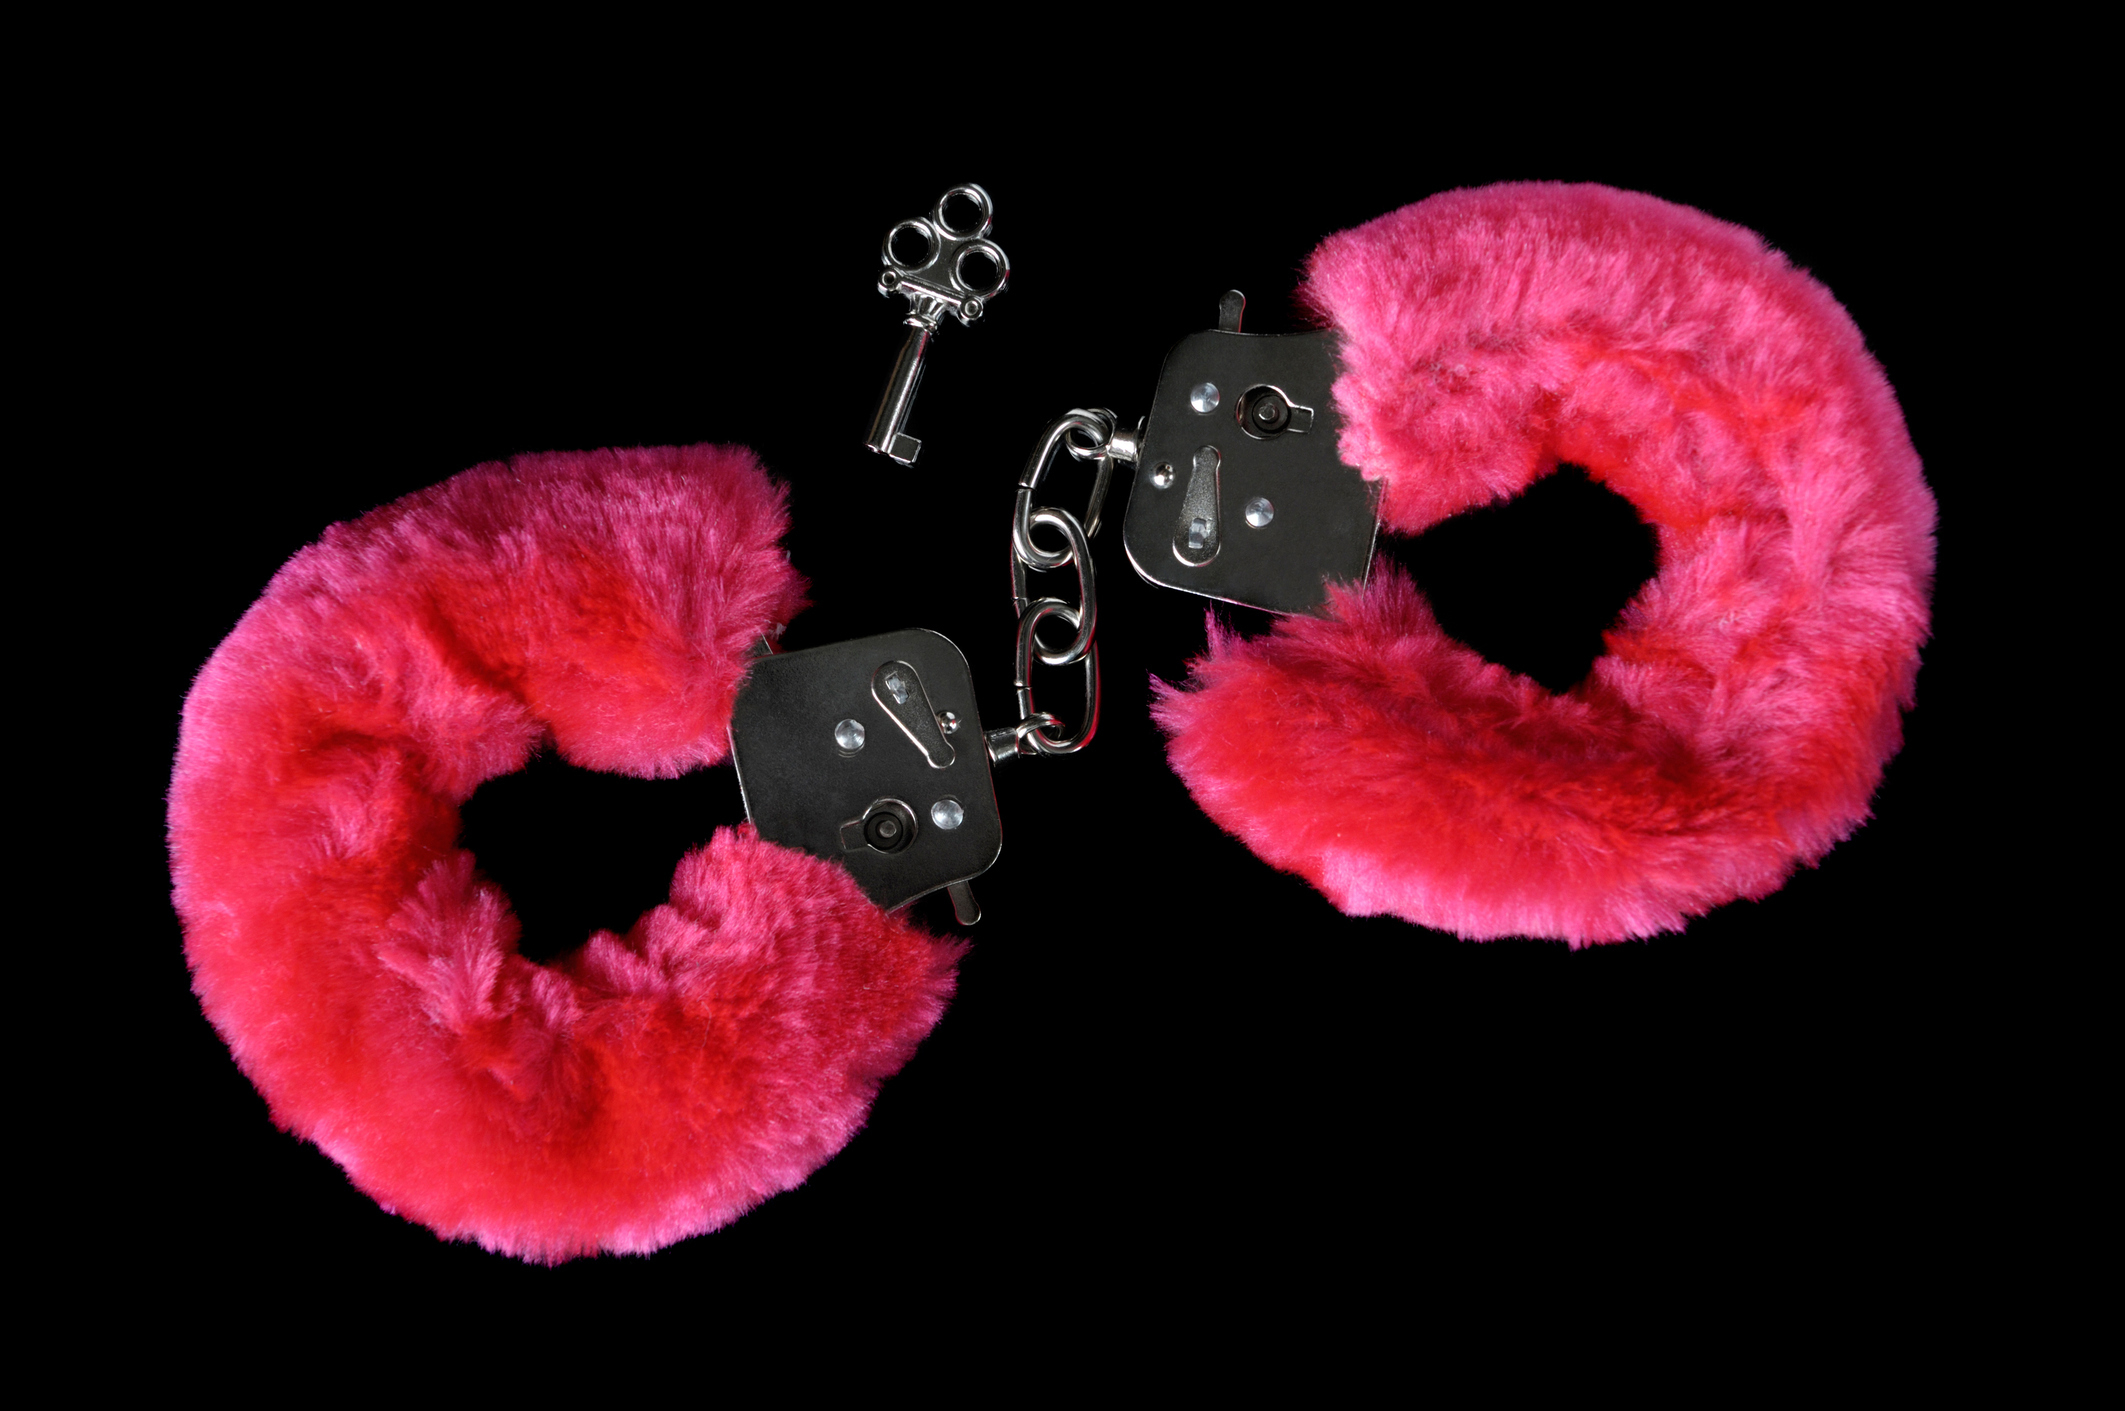 Pink fluffy handcuffs and a small key are placed against a black background